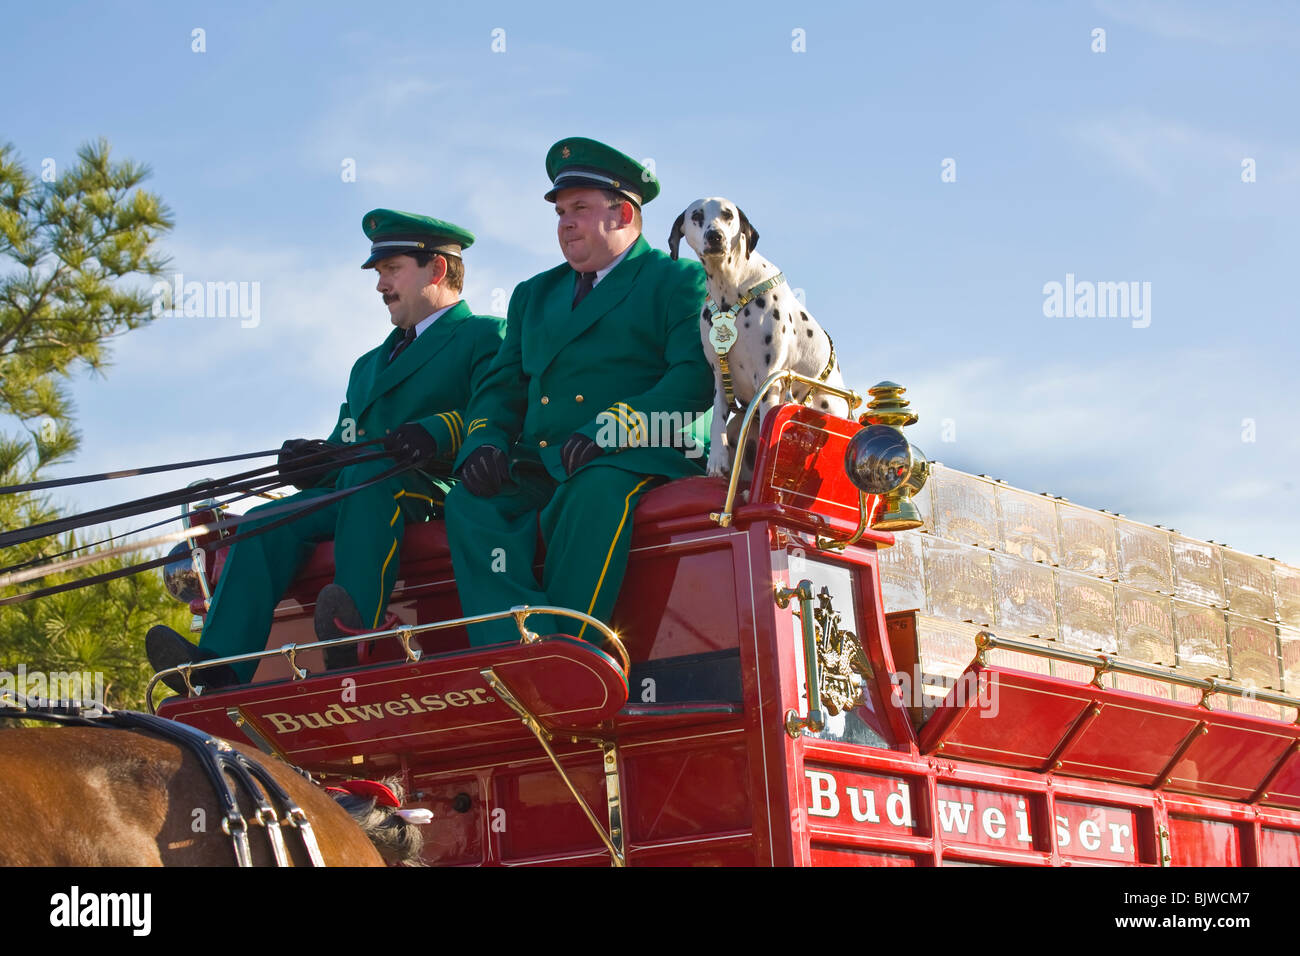 Dalmatian dog and drivers of Budweiser Clydesdale horses and beer wagon in Venice Florida Stock Photo